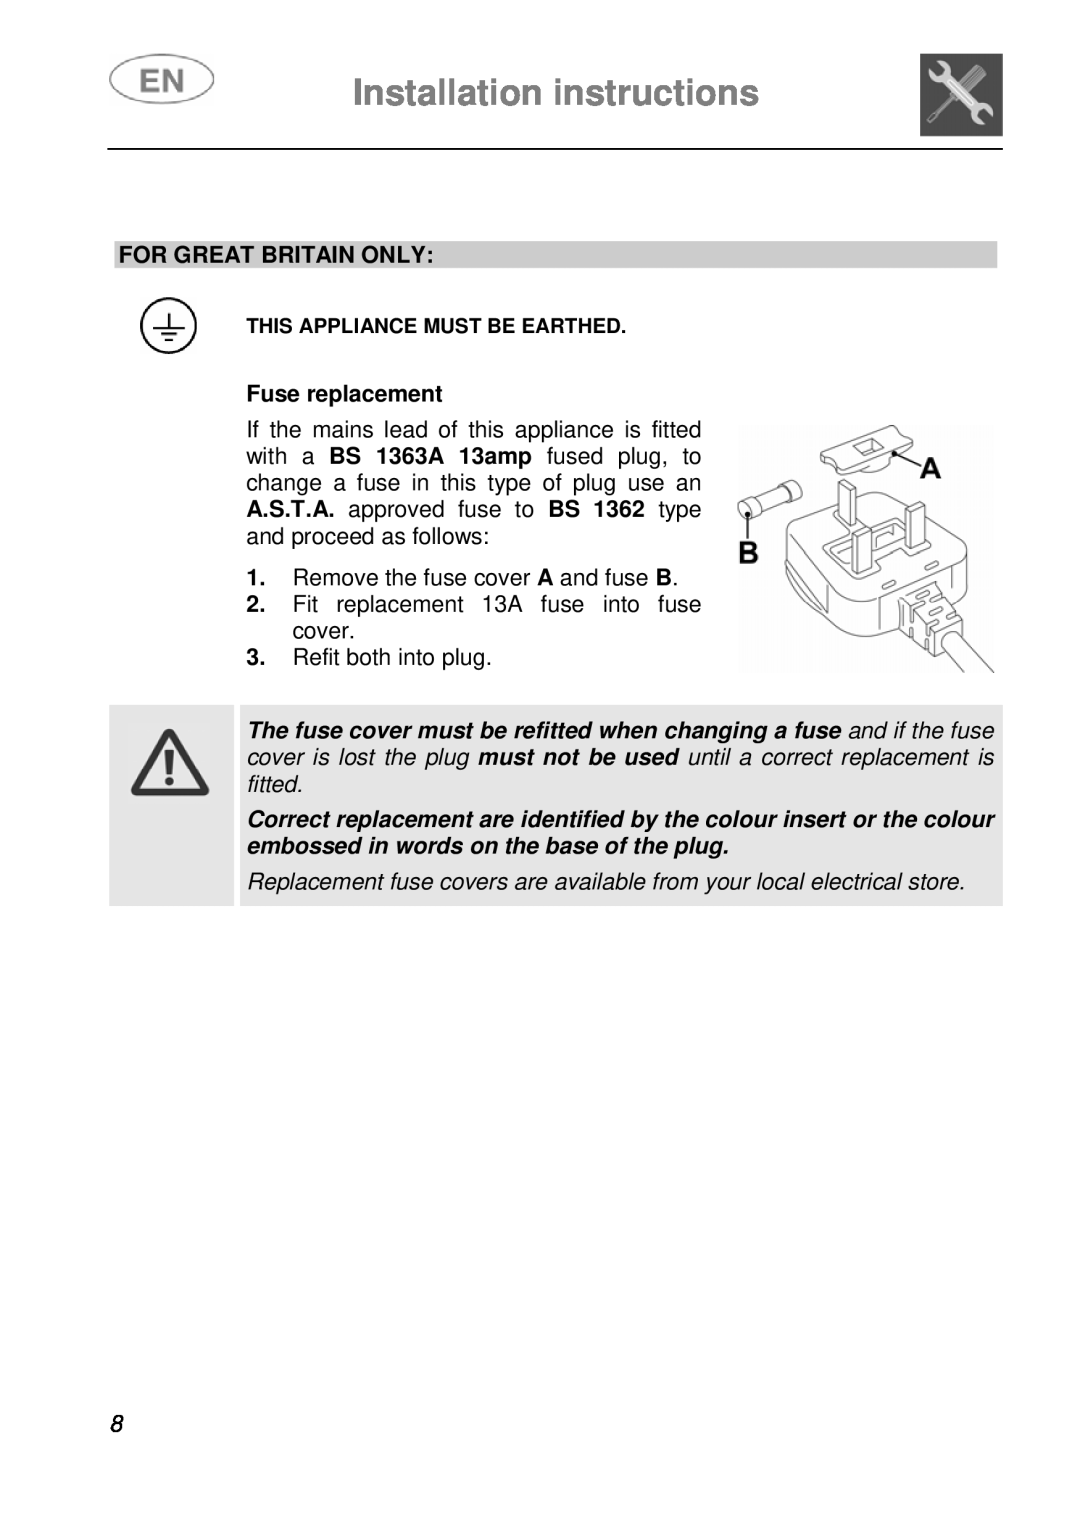 Smeg DI612A1 instruction manual Installation instructions, For Great Britain Only, Fuse replacement 